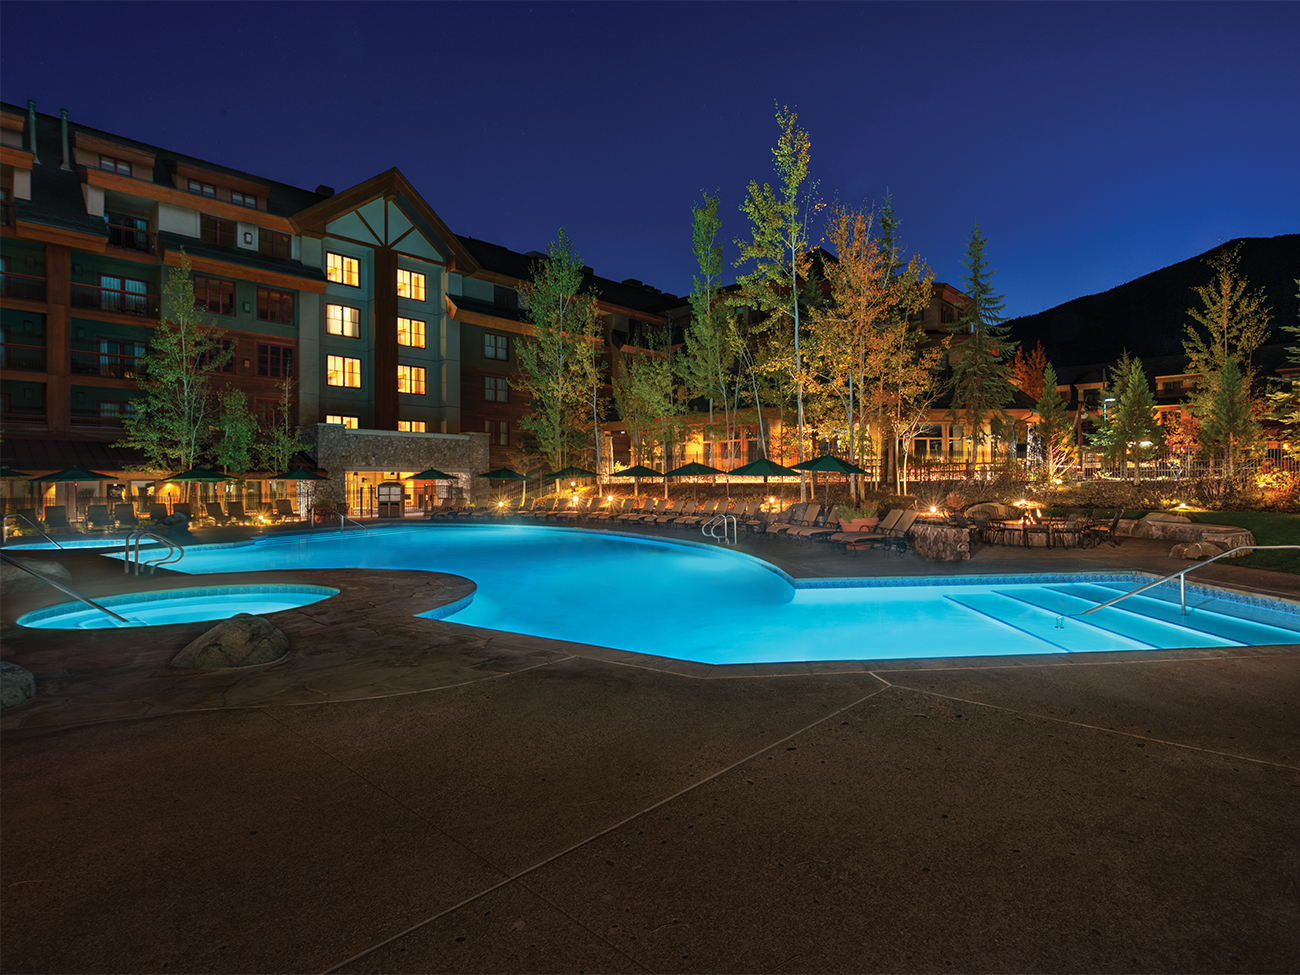 Marriott's Grand Residence Club<span class='trademark'>®</span> 1, Lake Tahoe Main Pool. Marriott's Grand Residence Club<span class='trademark'>®</span> 1, Lake Tahoe is located in South Lake Tahoe, California United States.